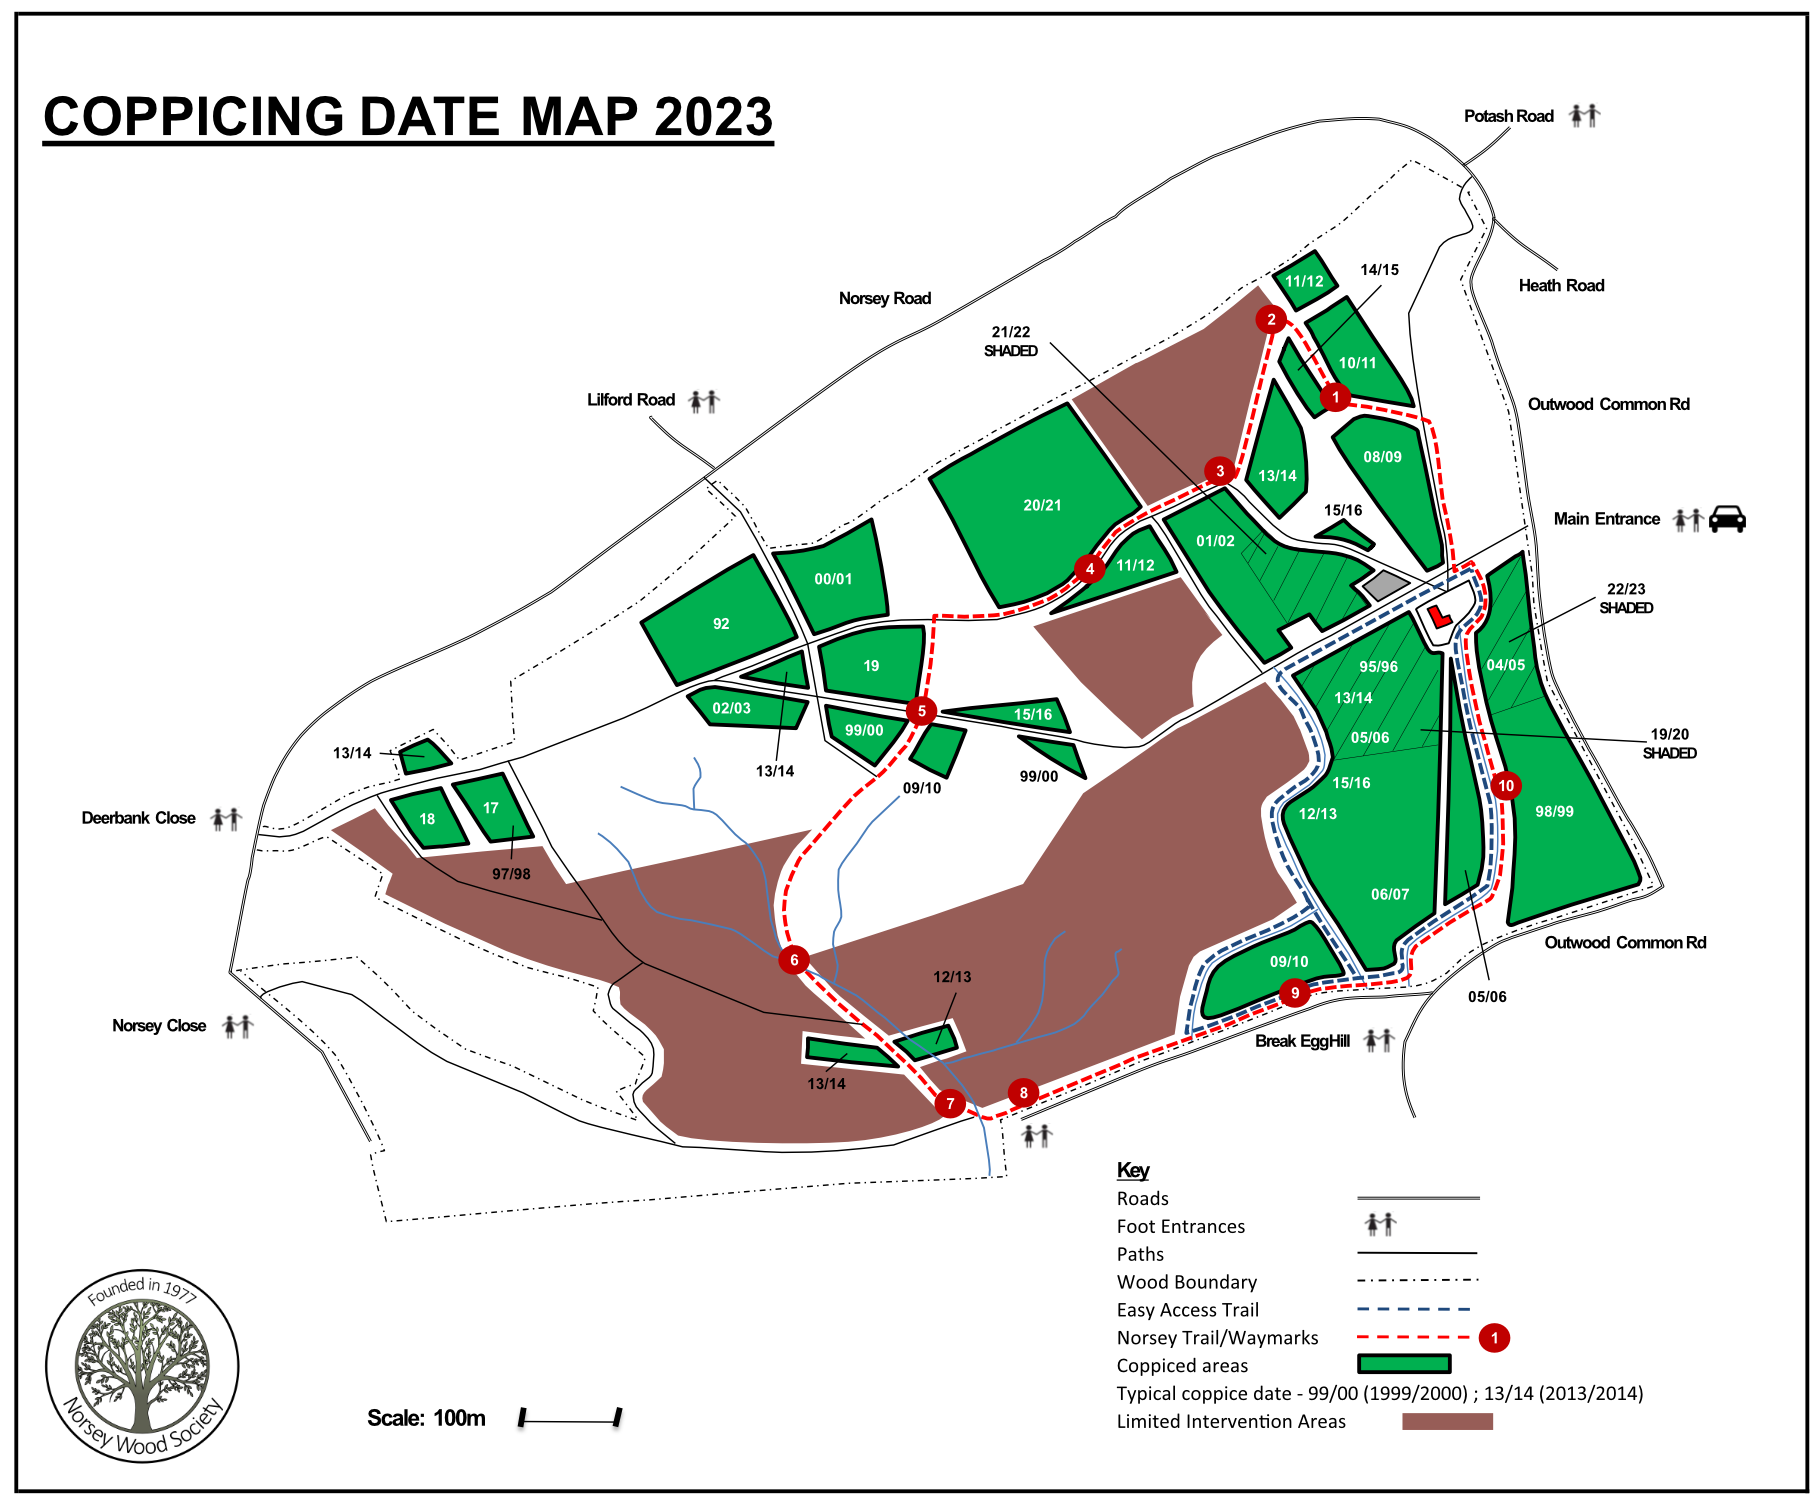 Coppicing map of Norsey Wood